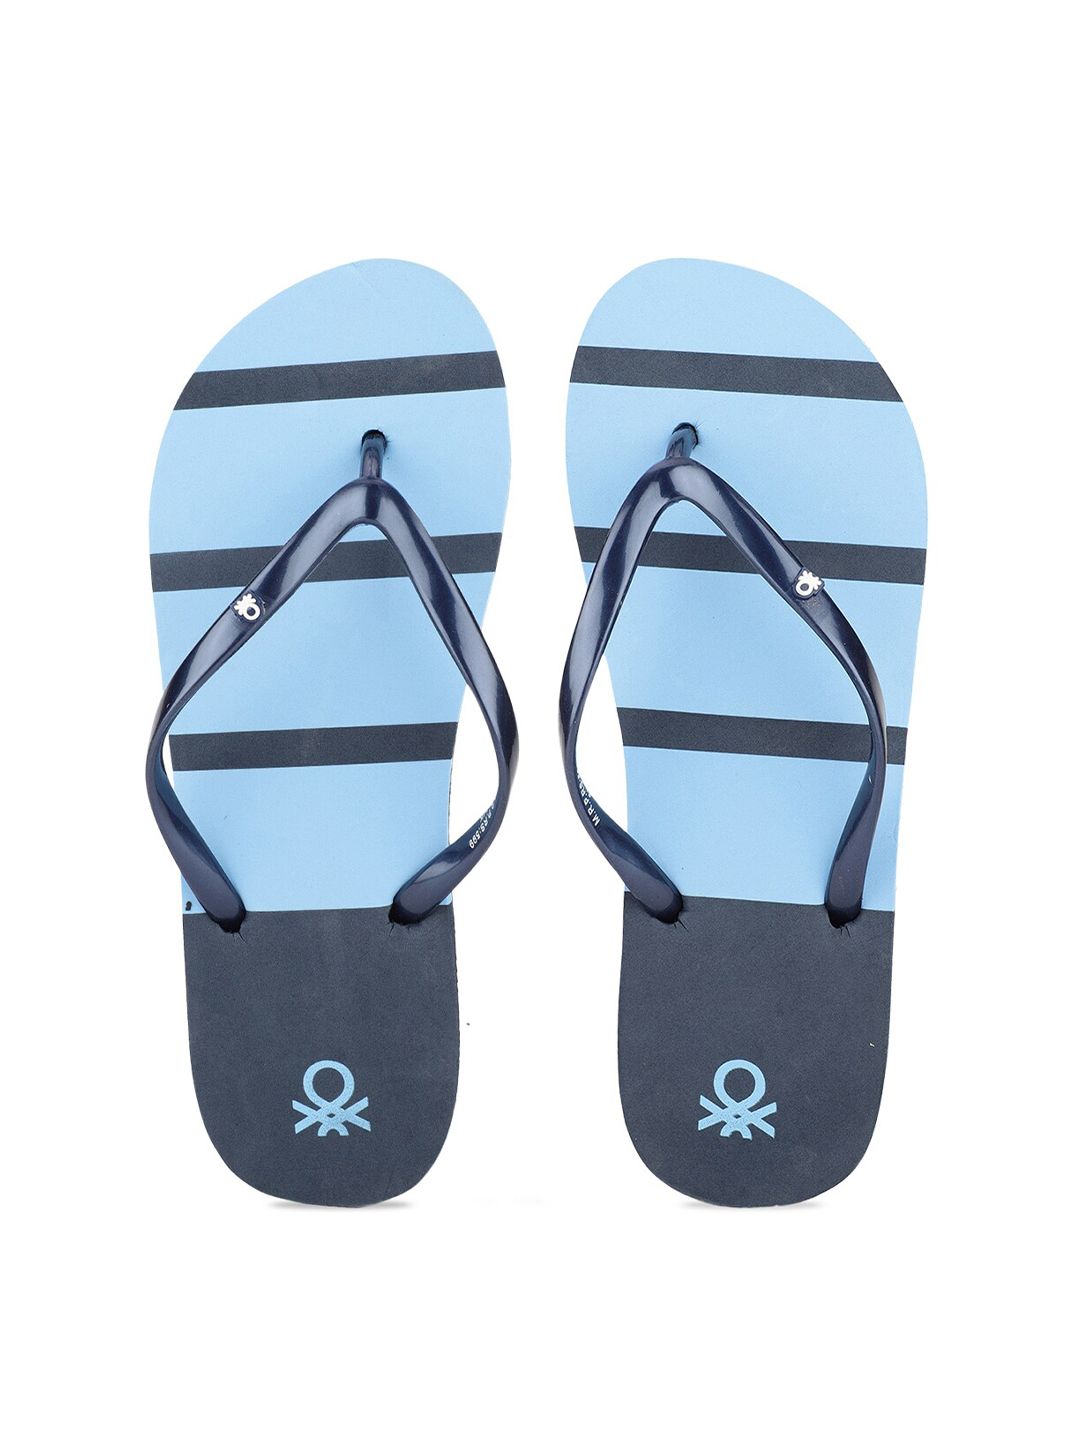 United Colors of Benetton Women Navy Blue & Teal Striped Thong Flip-Flops Price in India